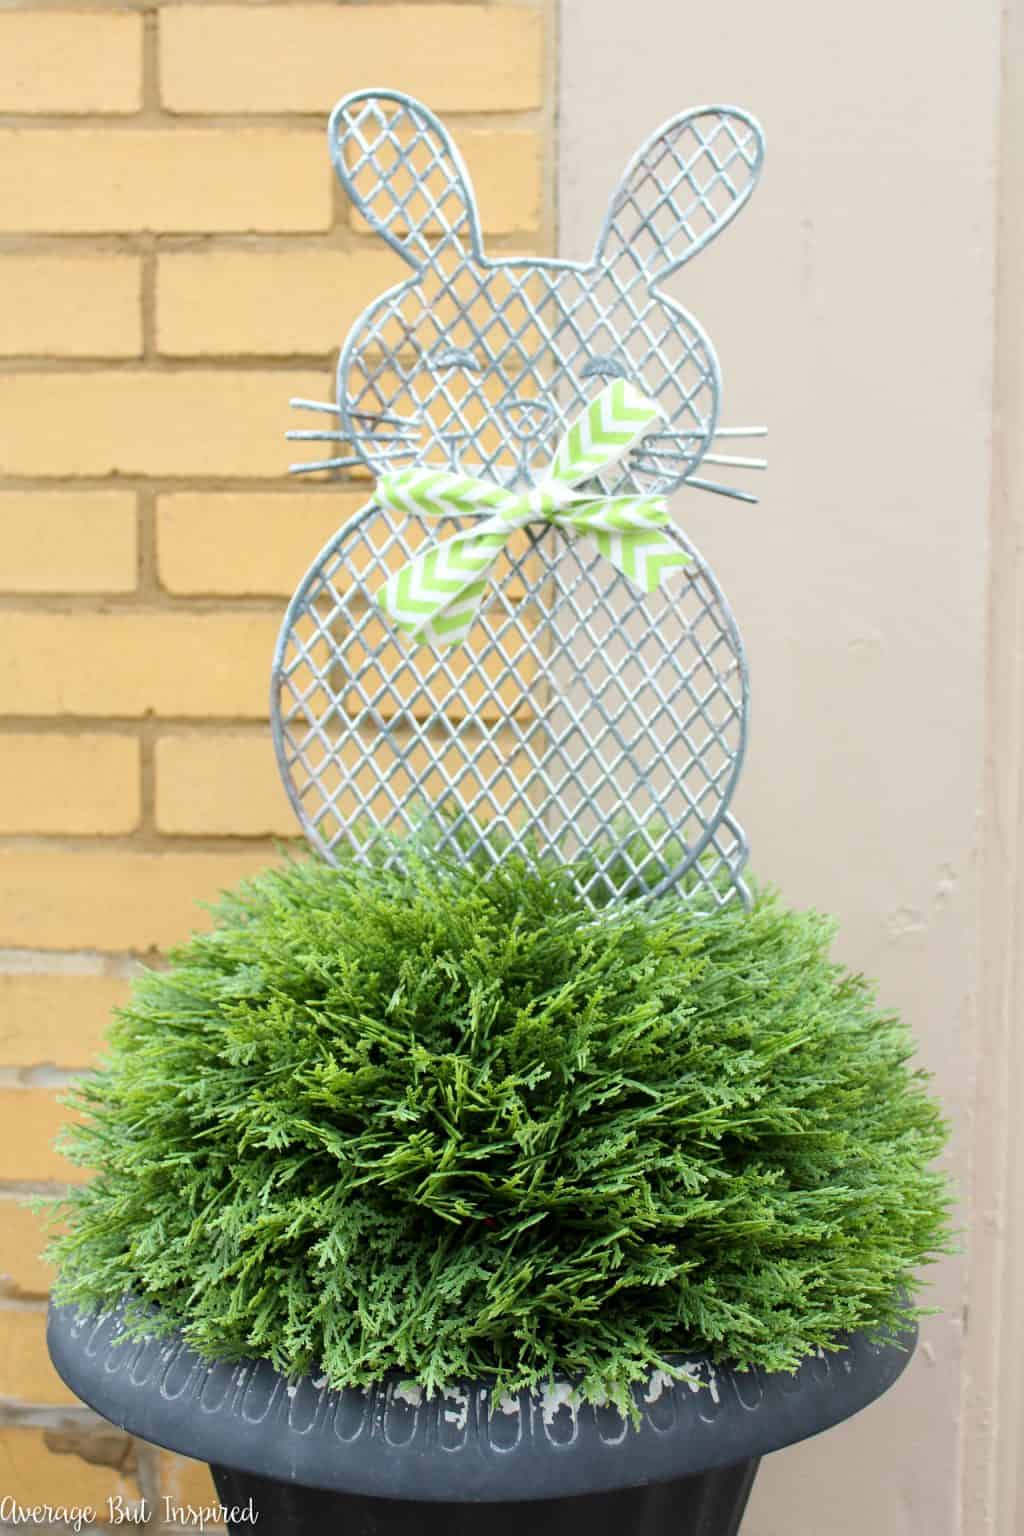 Give plastic dollar store planter stakes a beautiful makeover with a faux metal finish! Learn how to easily upgrade the look of these cute spring decorations in this post.